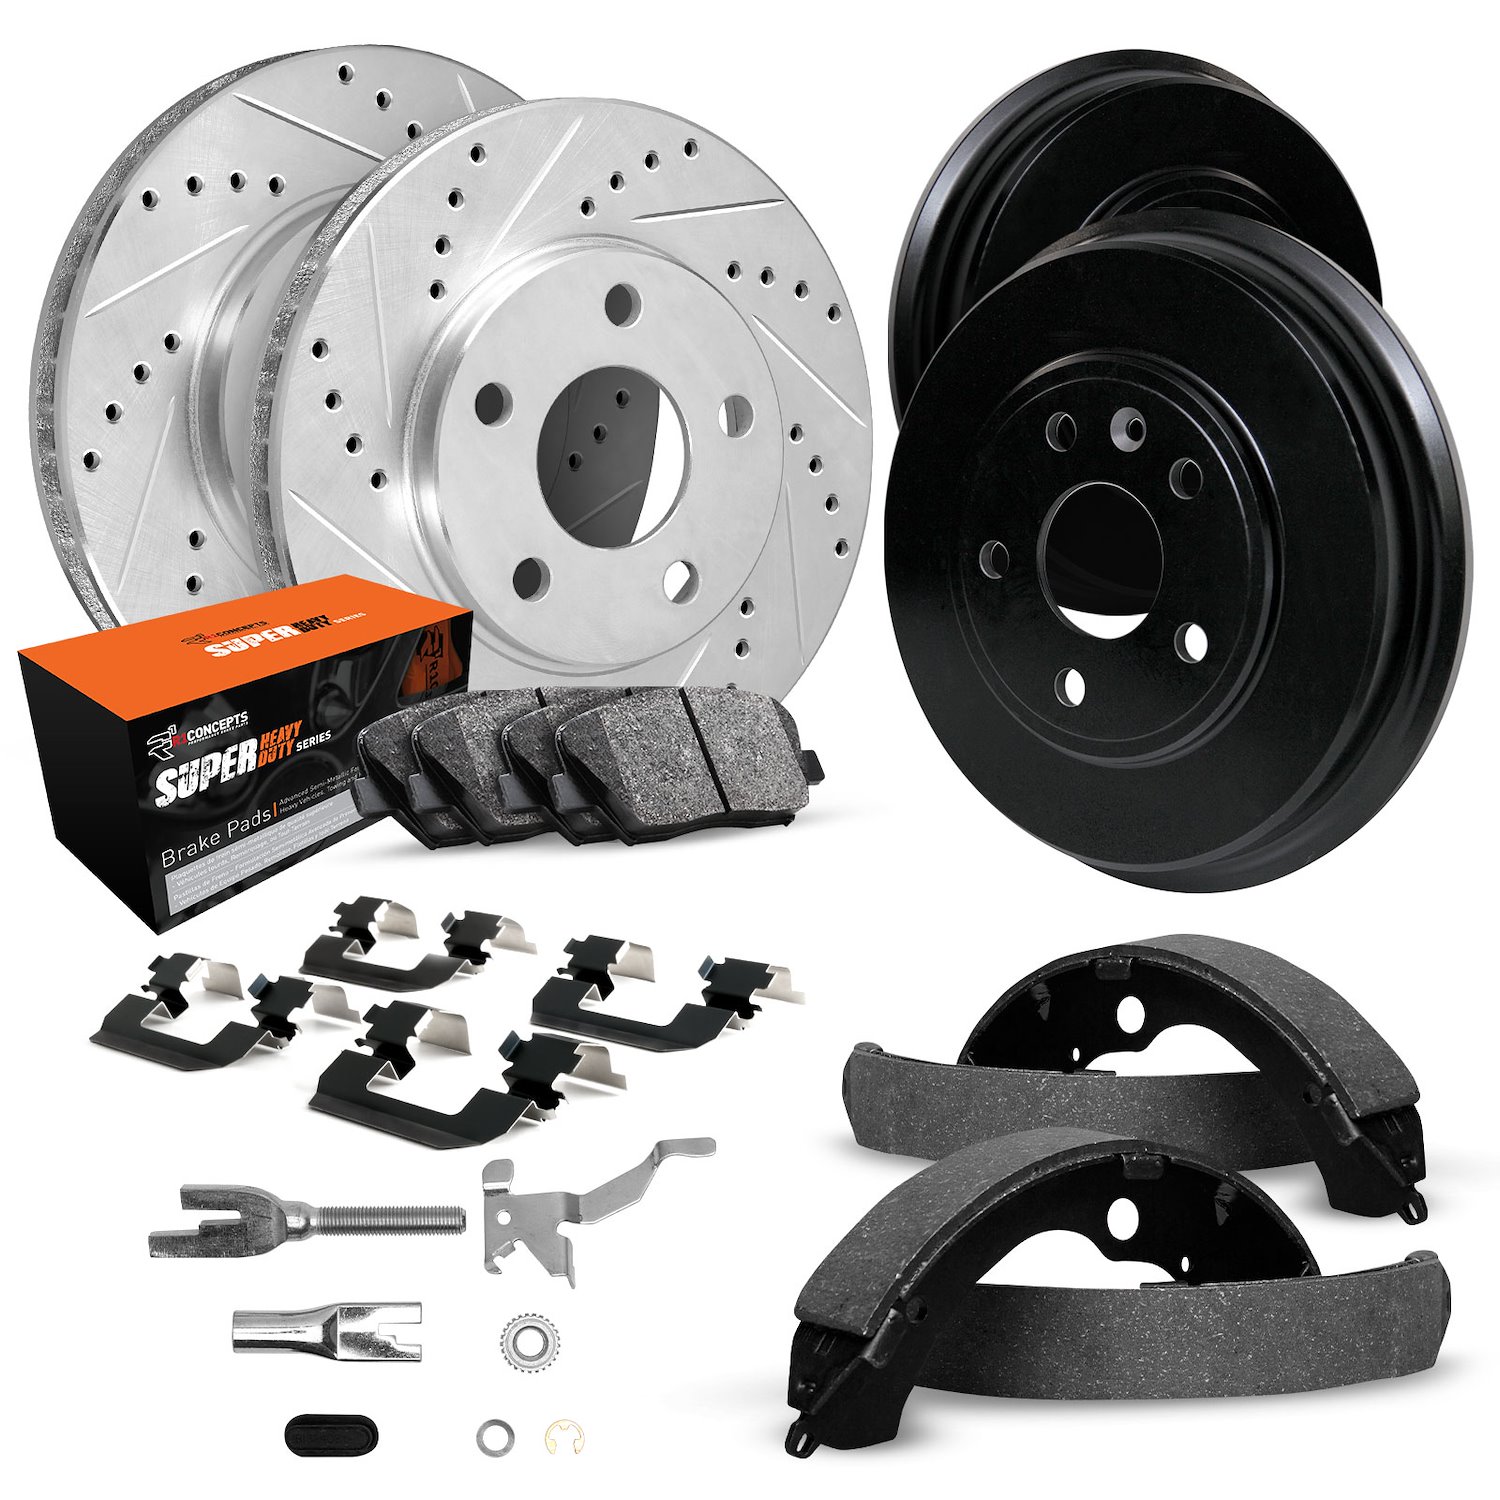 E-Line Drilled/Slotted Silver Rotor & Drum Set w/Super-Duty Pads, Shoes/Hardware/Adjusters, 1973-1973 Mopar